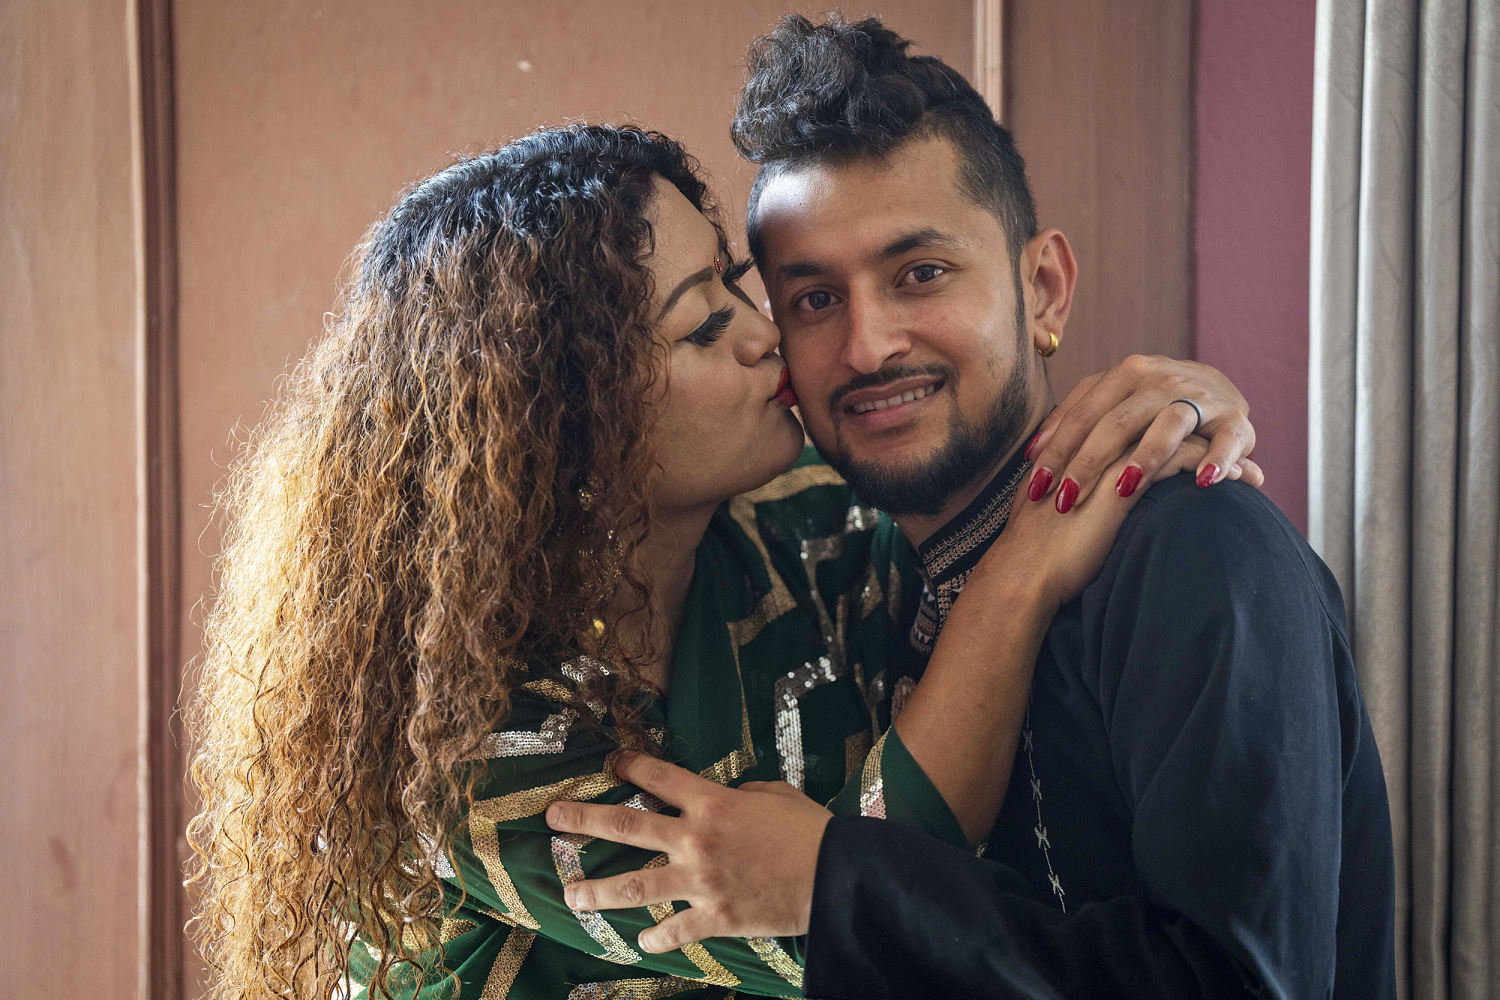 LGBTQ couple in Nepal becomes the 1st to receive official same-sex marriage status